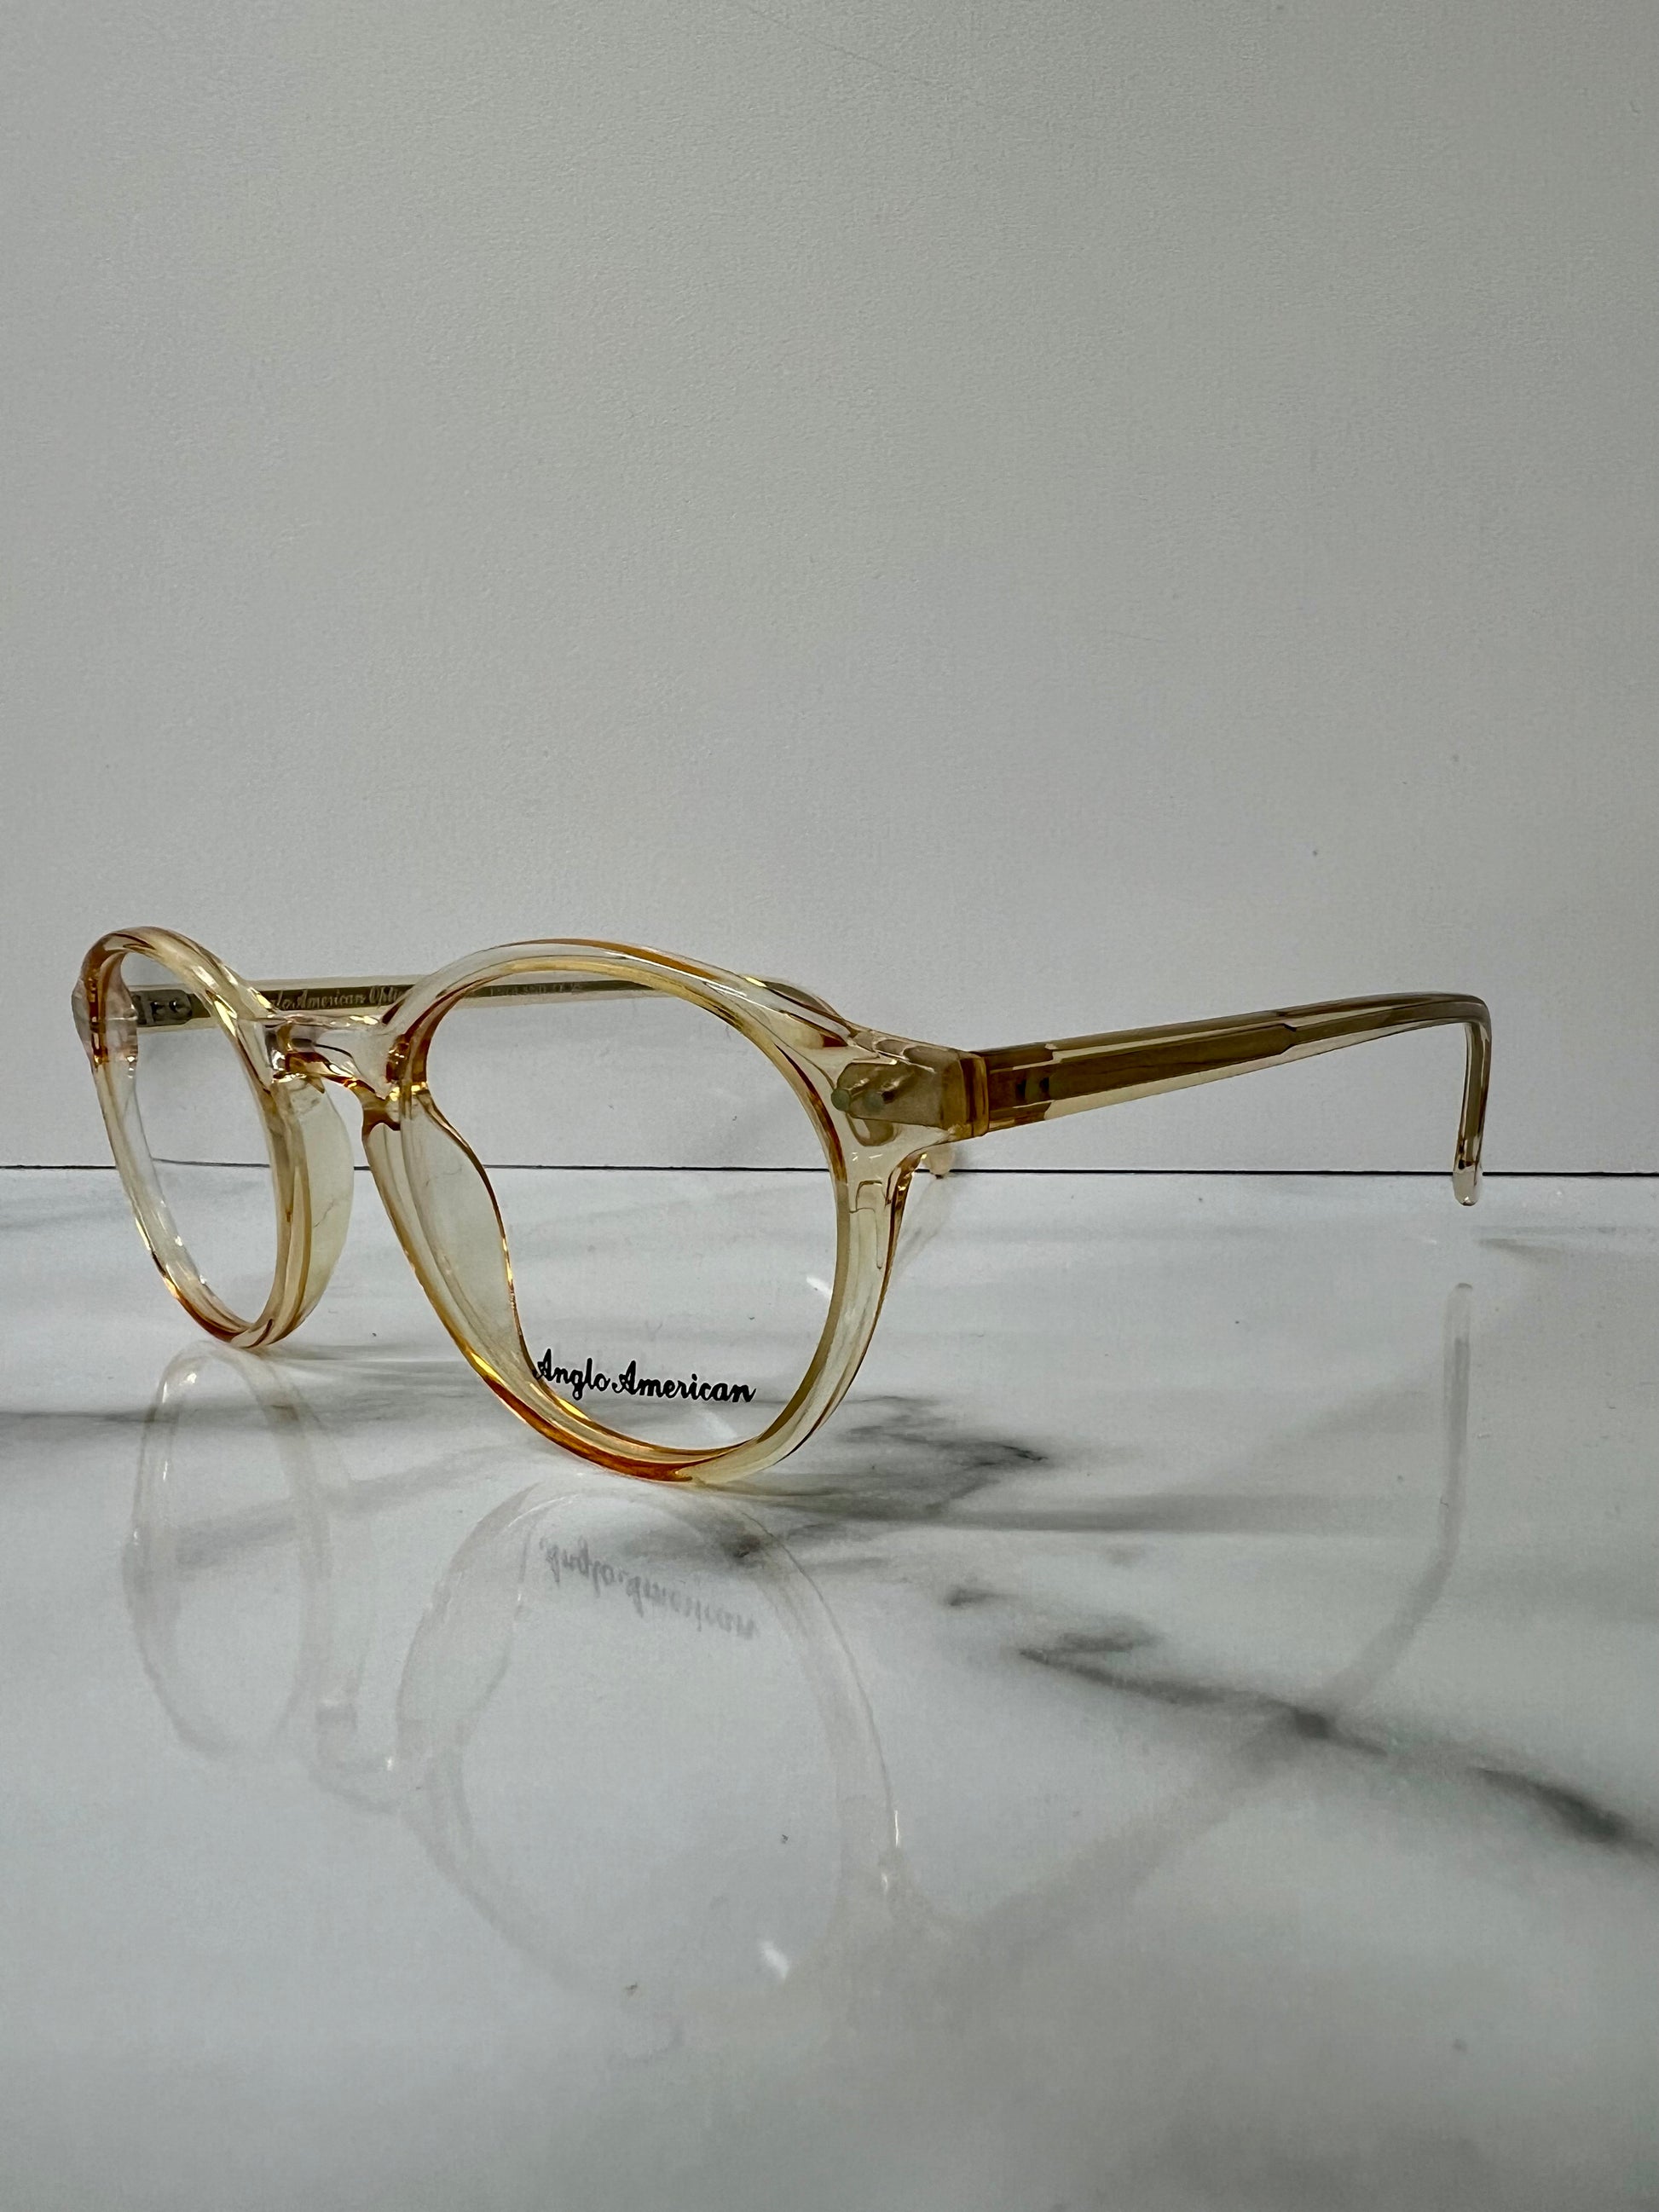 Anglo American 406 Optical Glasses Clear Champagne England Designer Eyeglasses